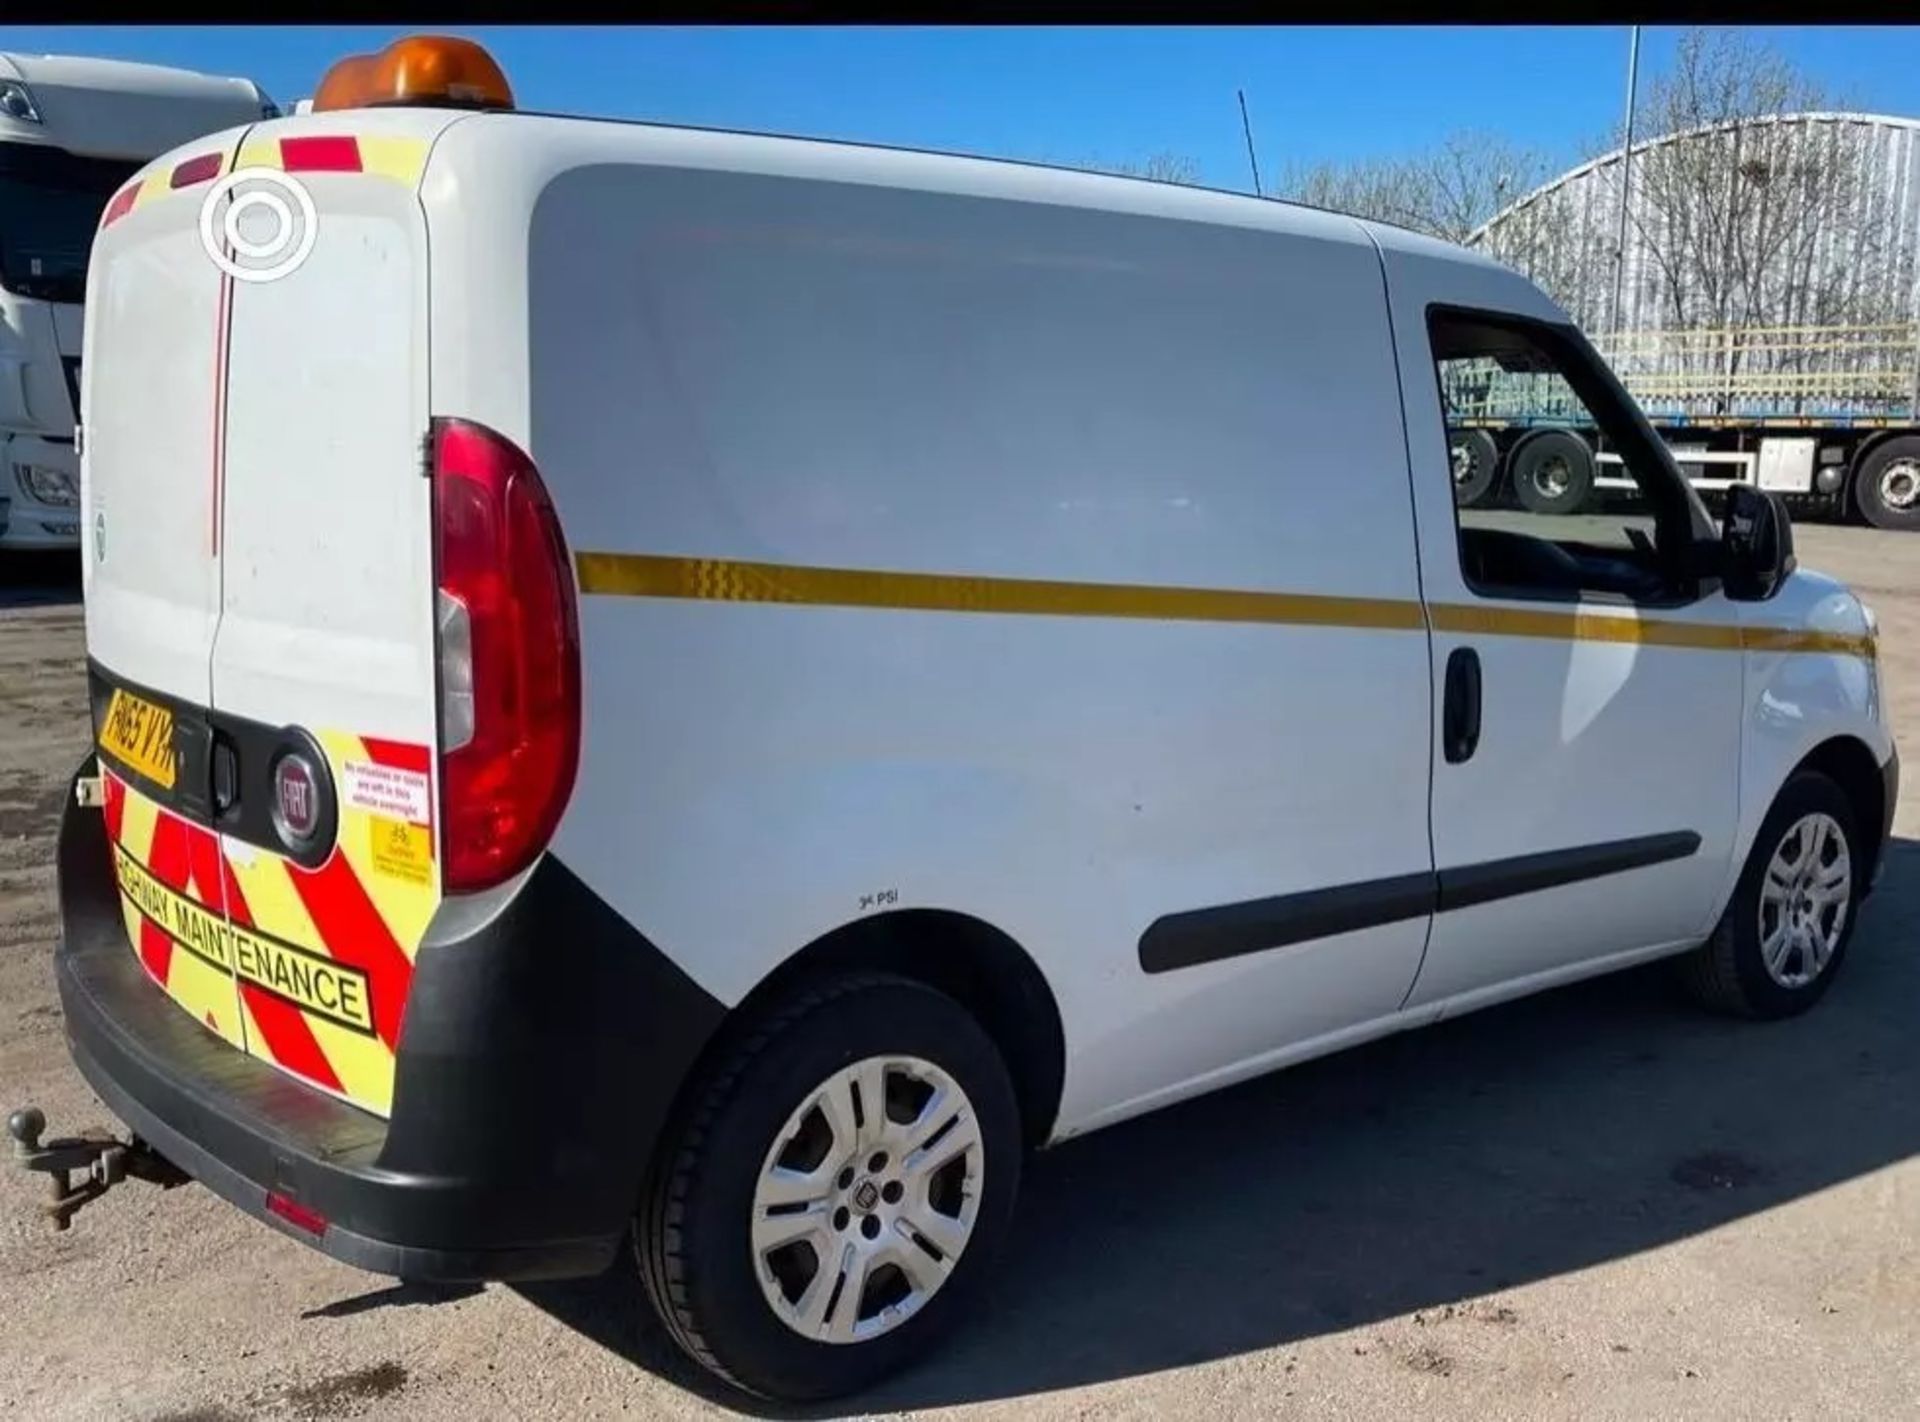 2015 FIAT DOBLO HDI PANEL VAN - RELIABLE FLEET VEHICLE, READY FOR WORK - Image 3 of 13